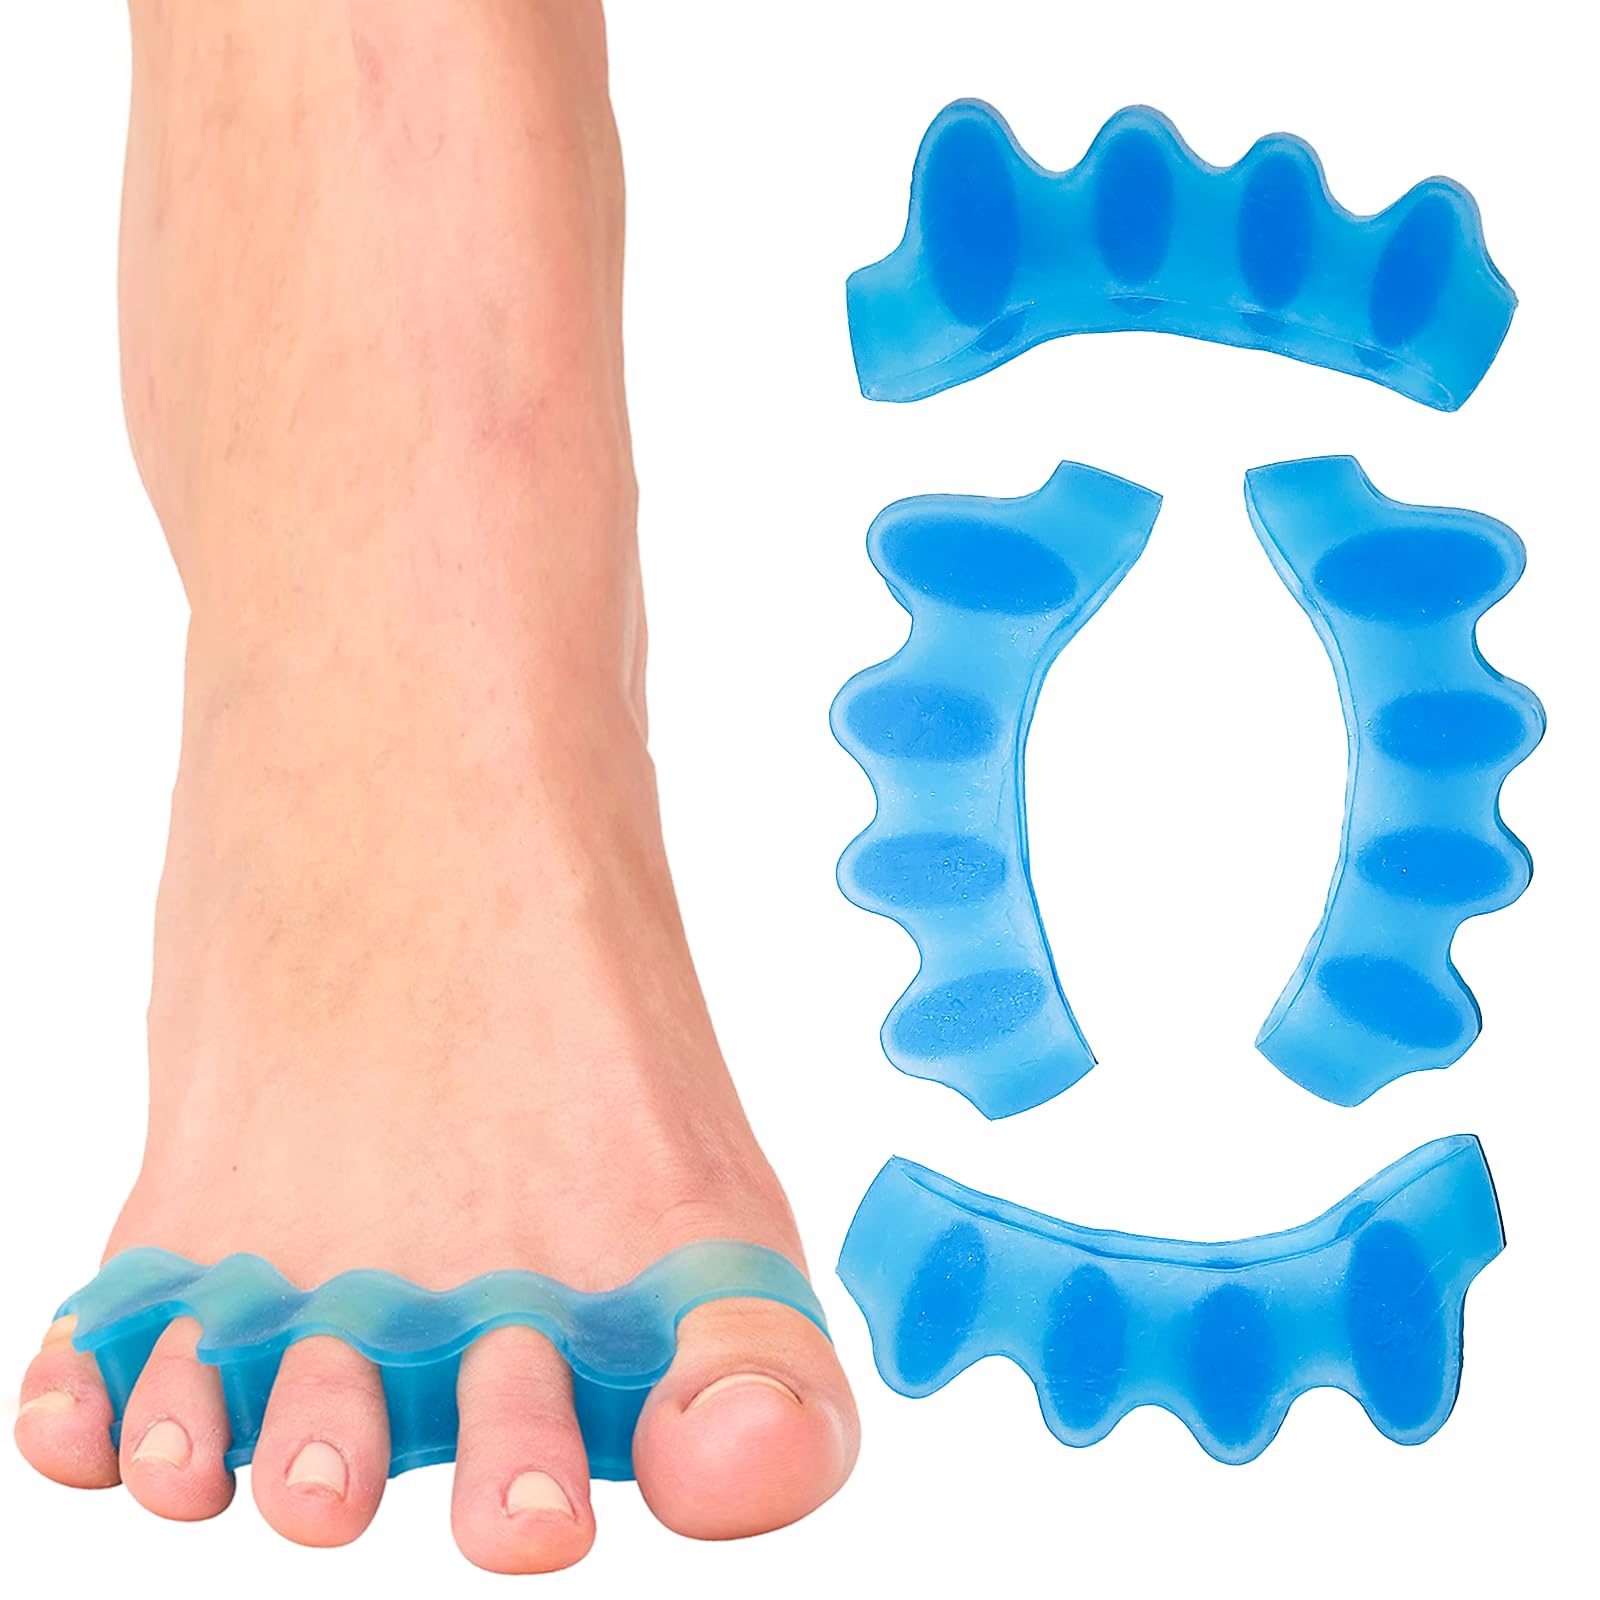  Yoga Gel Toe Separators, Toe Stretcher, Toe Straightener  Spreader, Silicone Toe Spacers Foot Pain Relief, Gel Bunions Corrector, Toe  Separators for Hammer Toe, Overlapping Toes, Hallux Valgus, 2 Pairs : Health